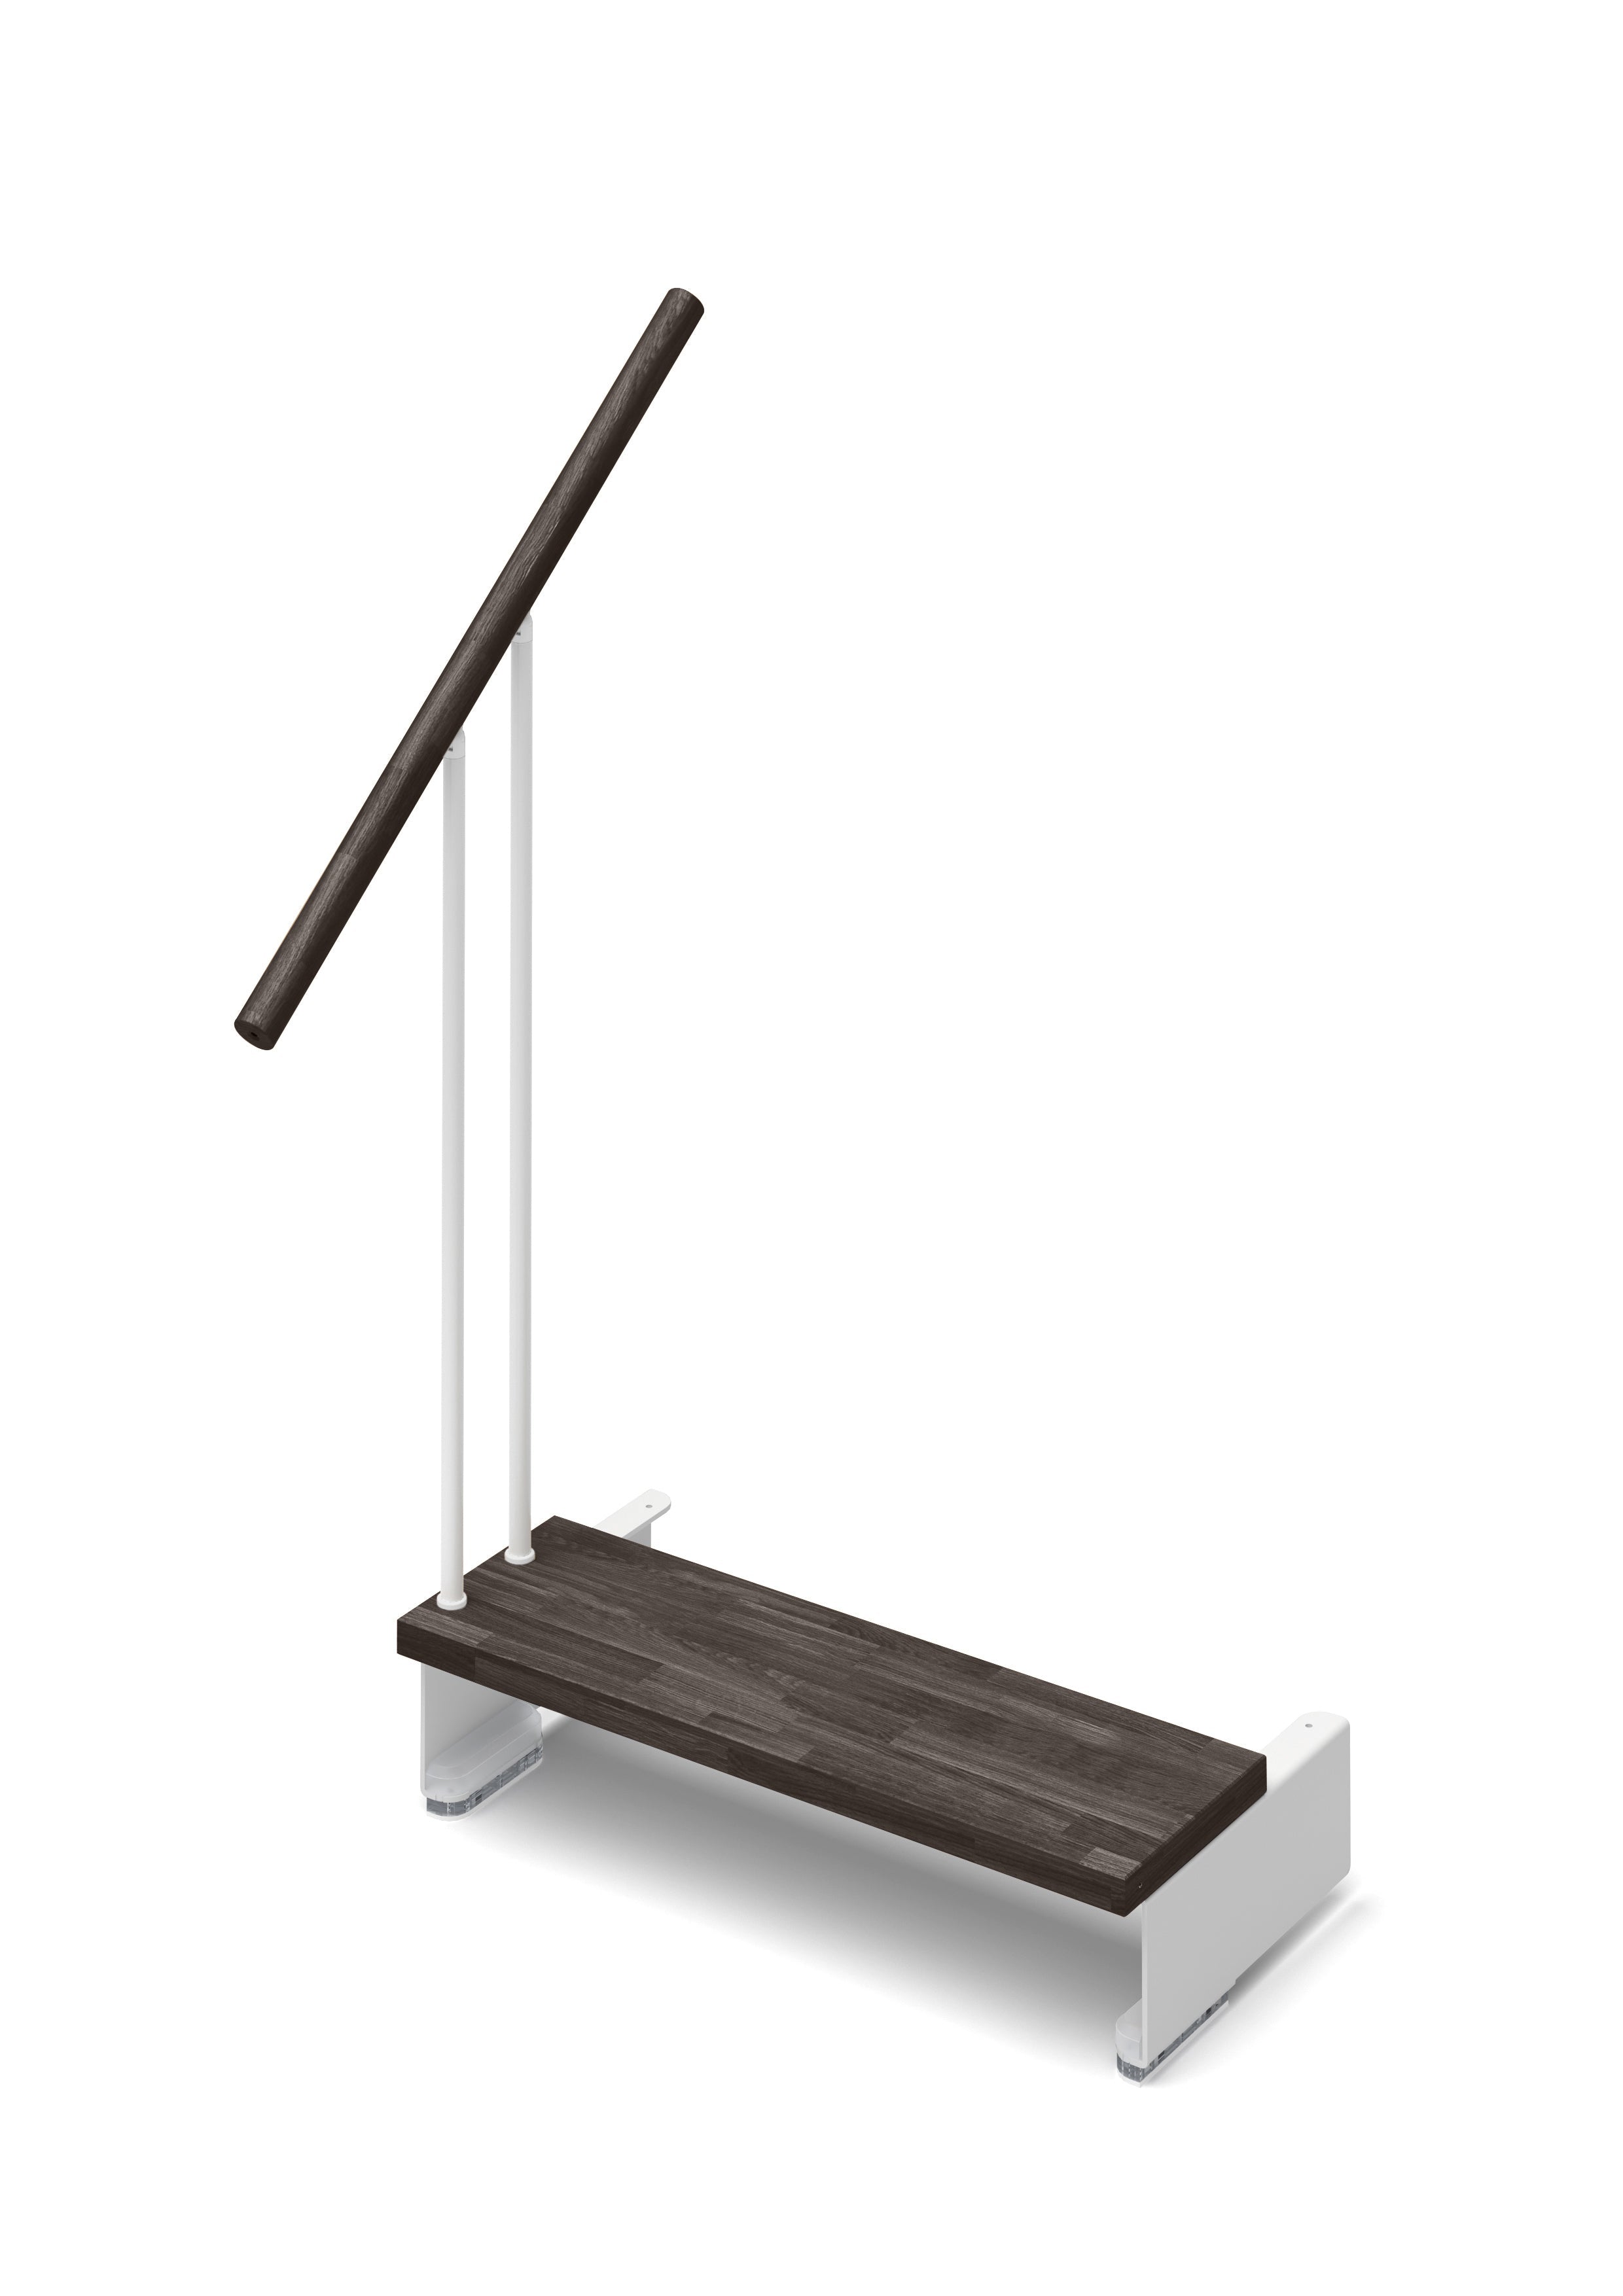 Additional step Adapta 84cm (with structure and railing) - Wengé 23